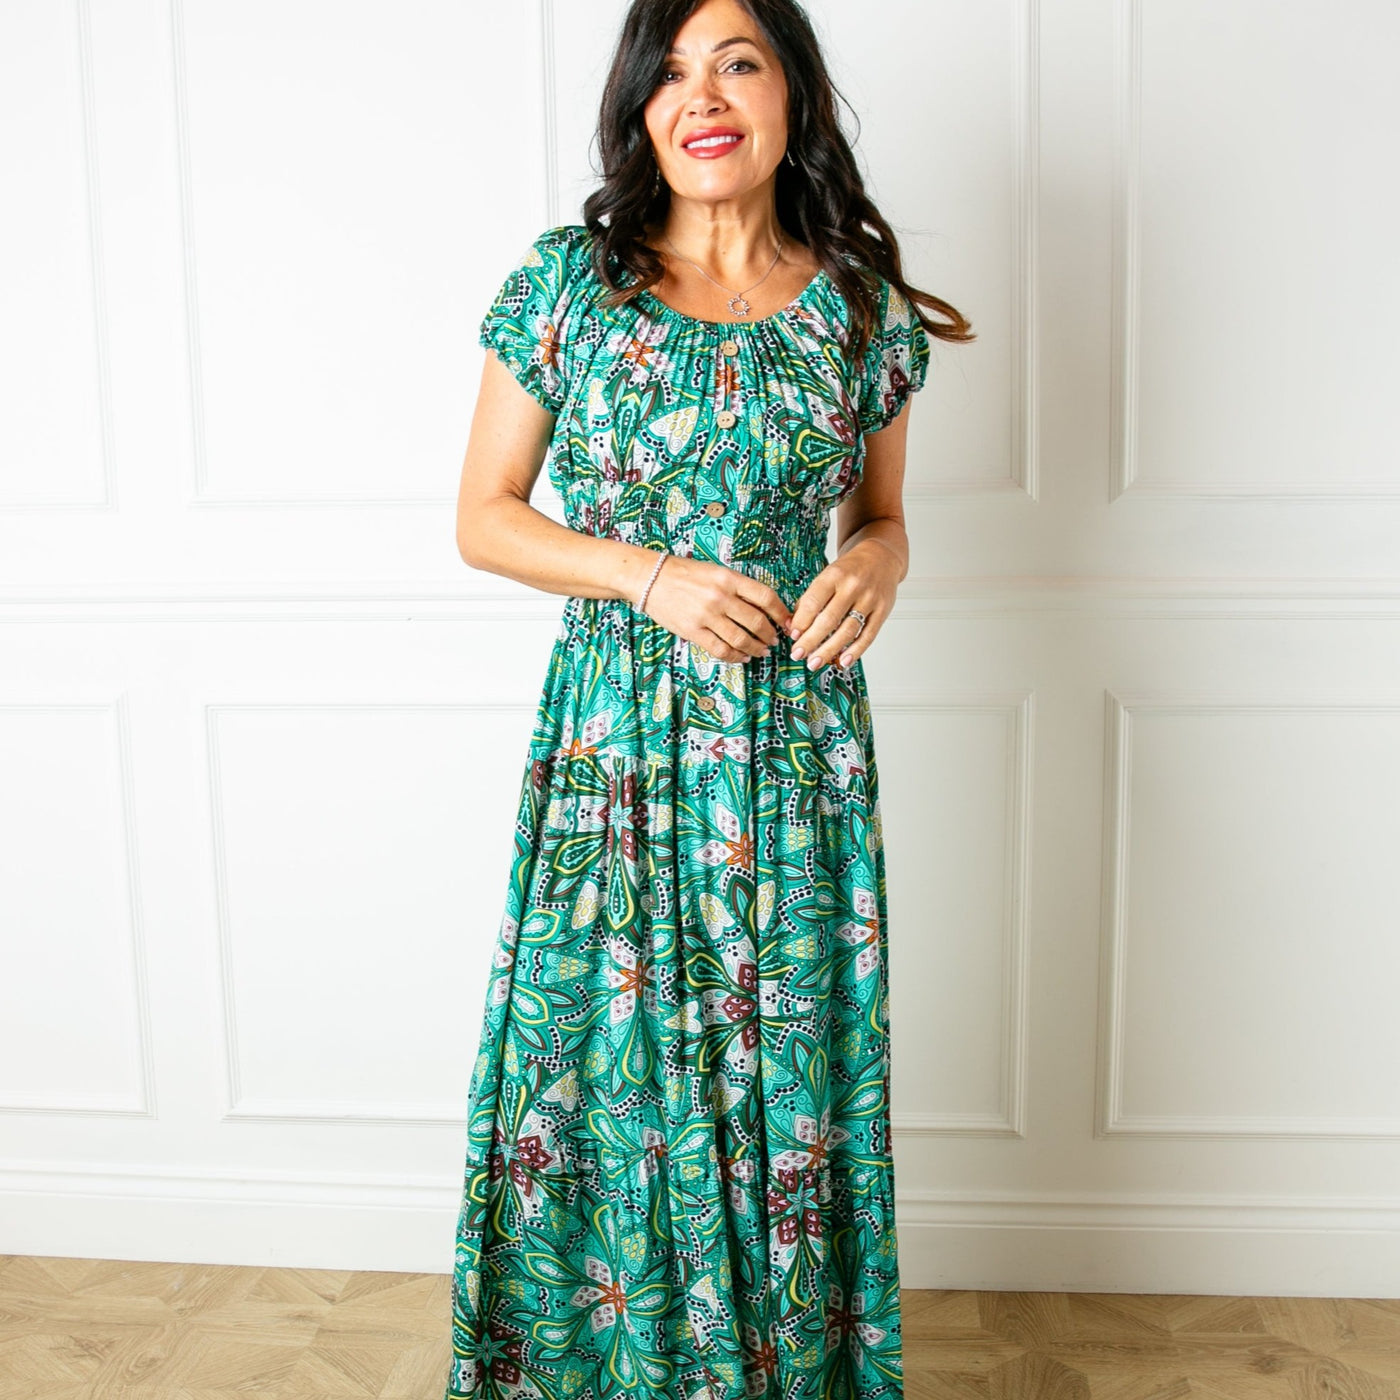 The green Printed Button Maxi Dress with short puffy elasticated sleeves that can be worn on or off the shoulder